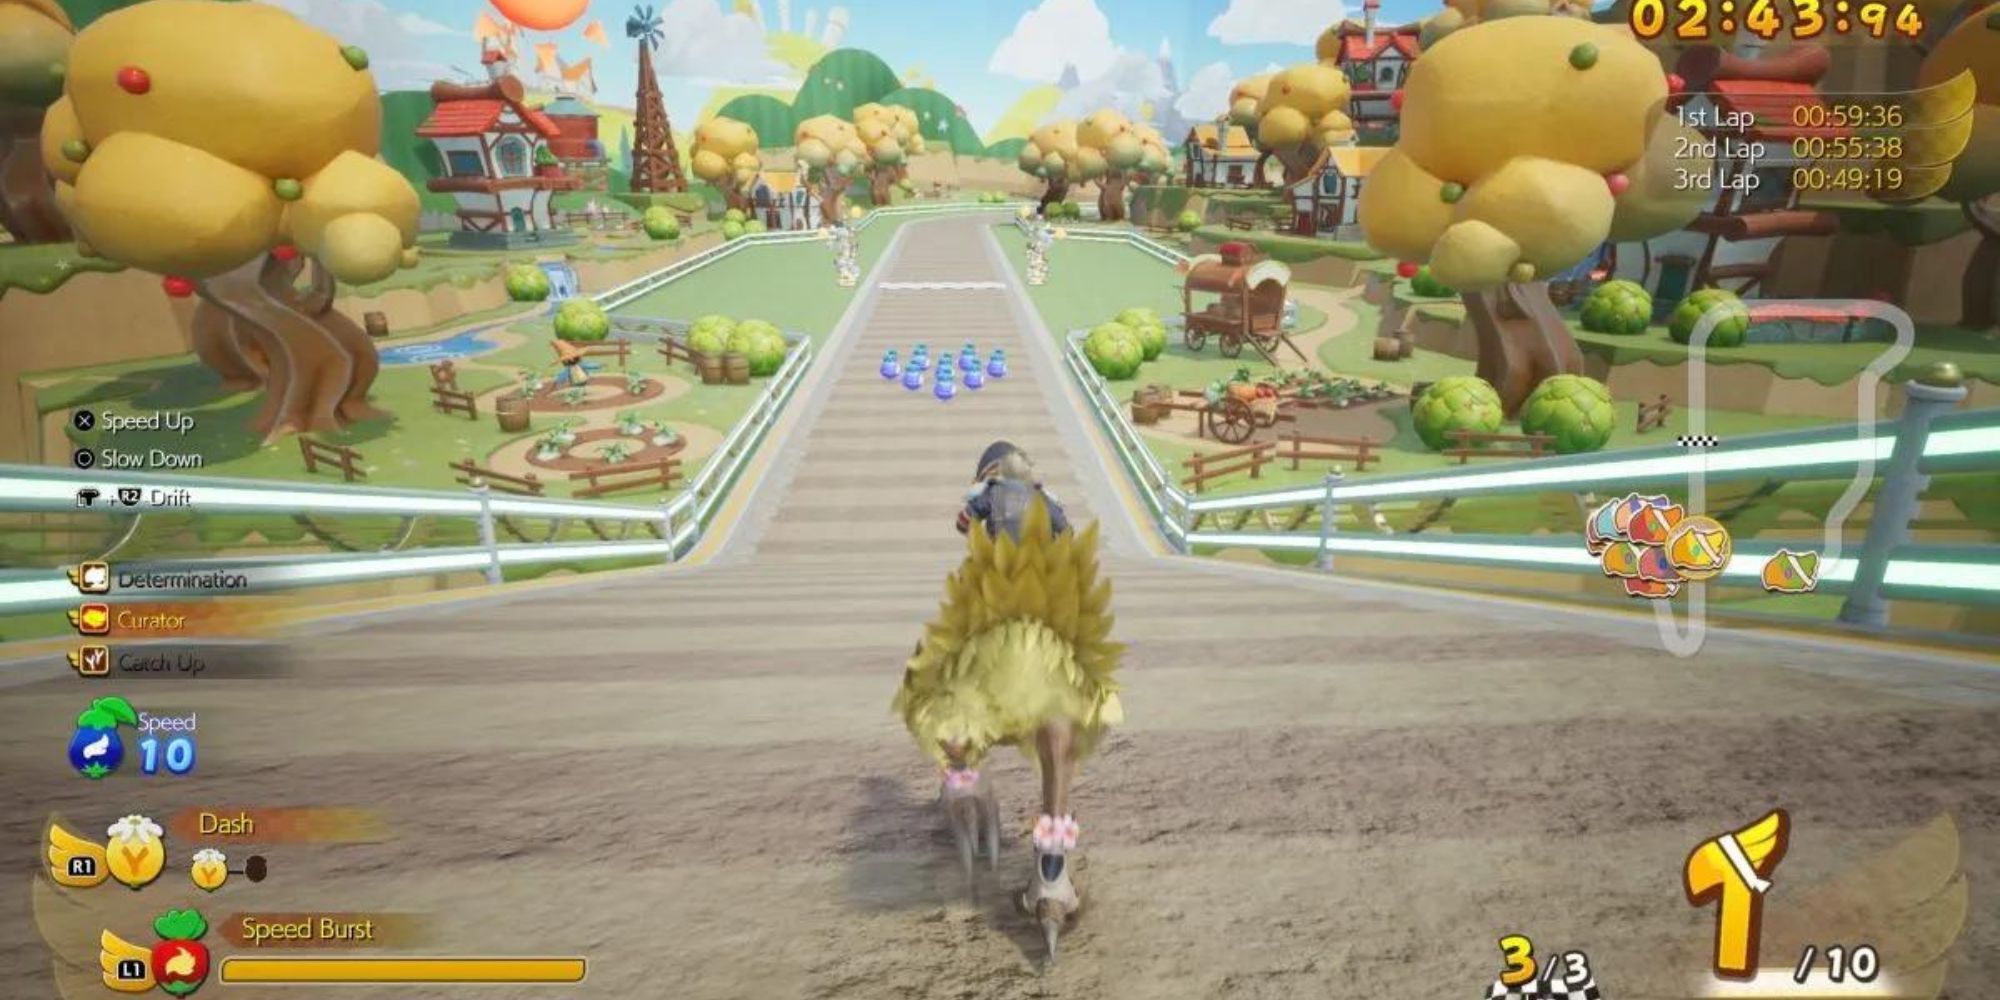 Screenshot from Final Fantasy 7 Rebirth of Cloud riding a Chocobo through a dusty track.